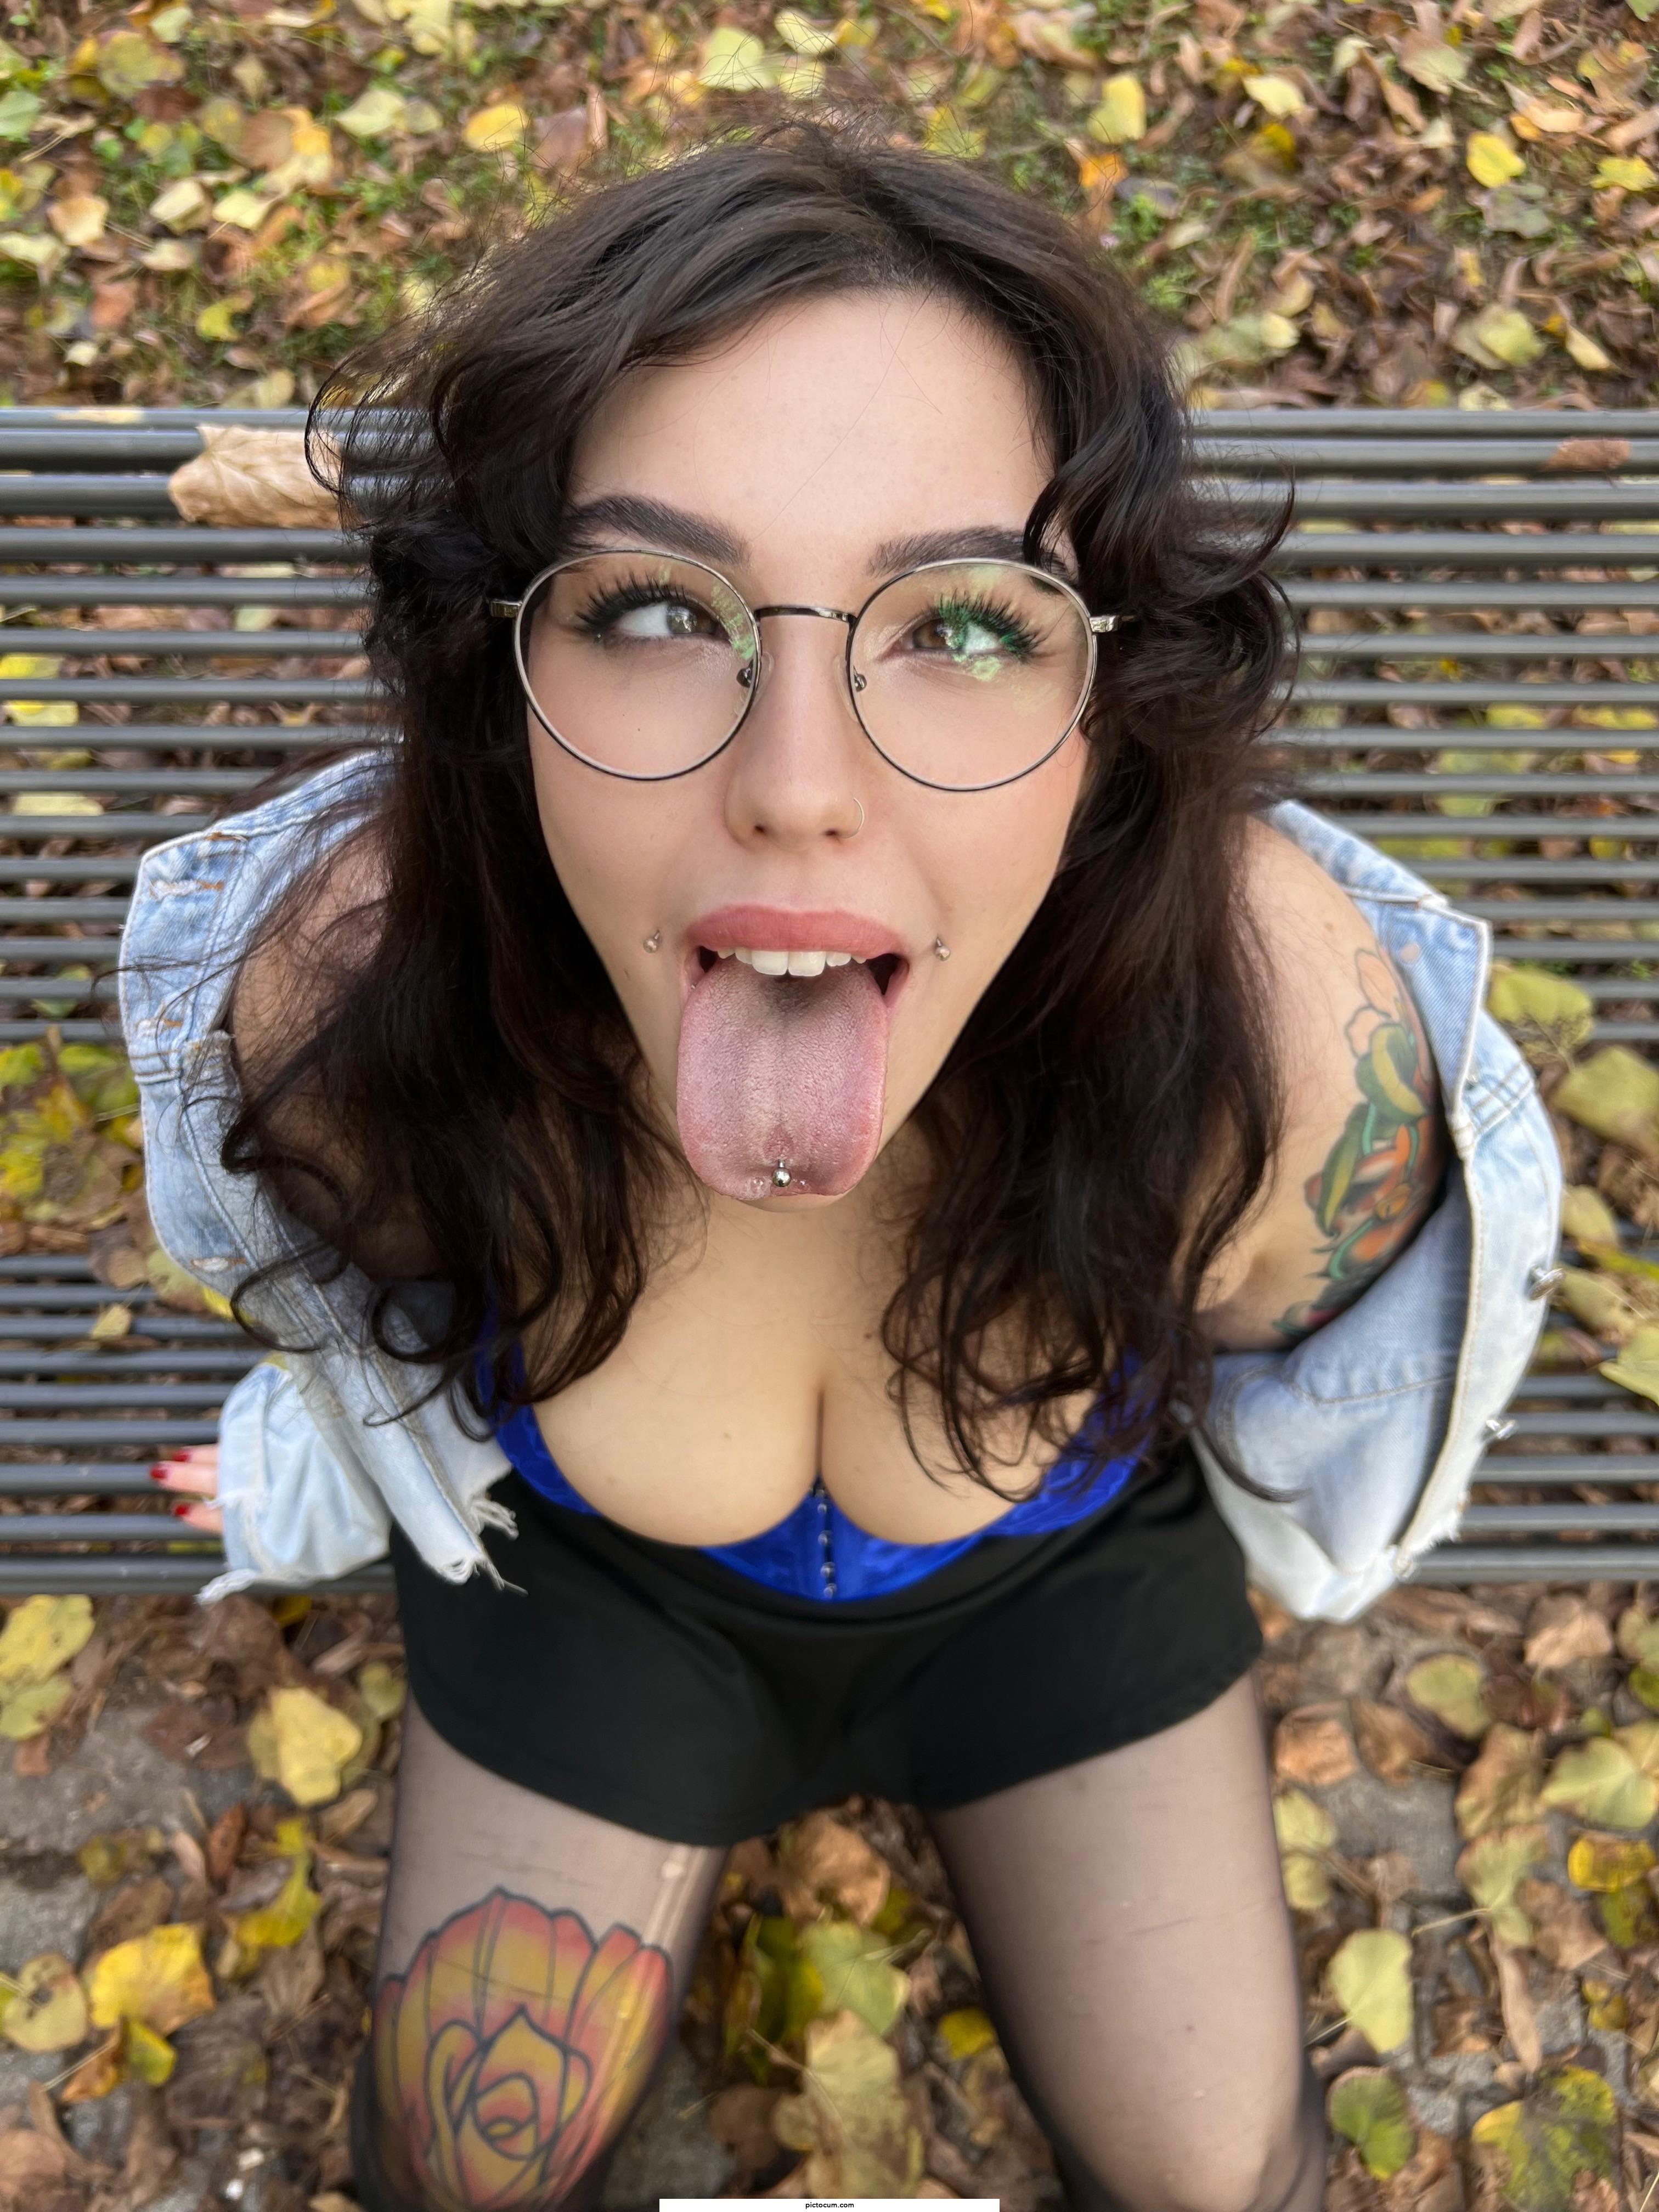 Would you cum in my mouth even if we are out?